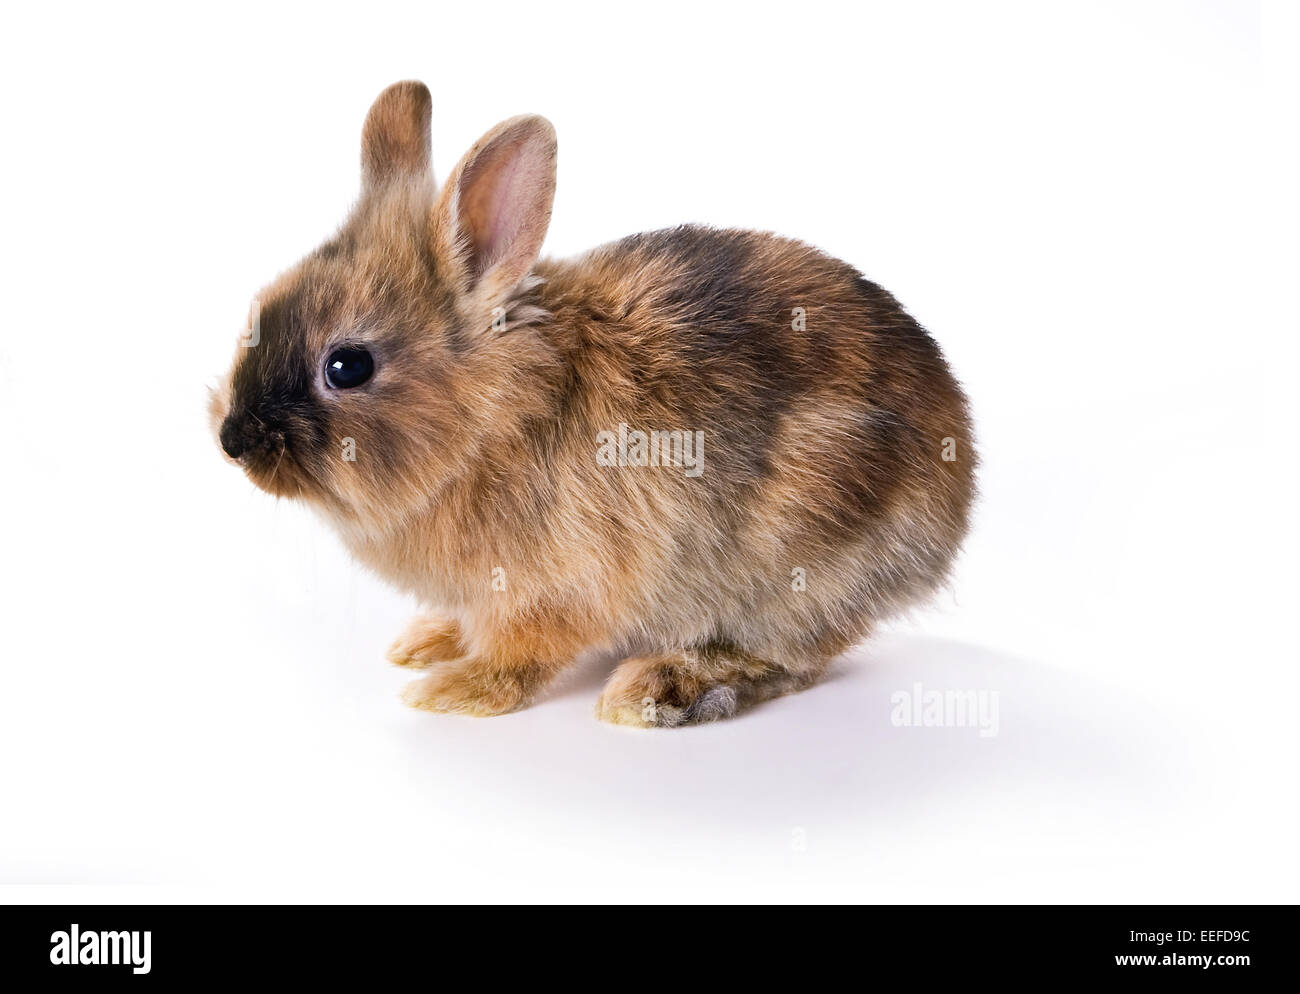 Very young little brown rabbit against a white background Stock Photo